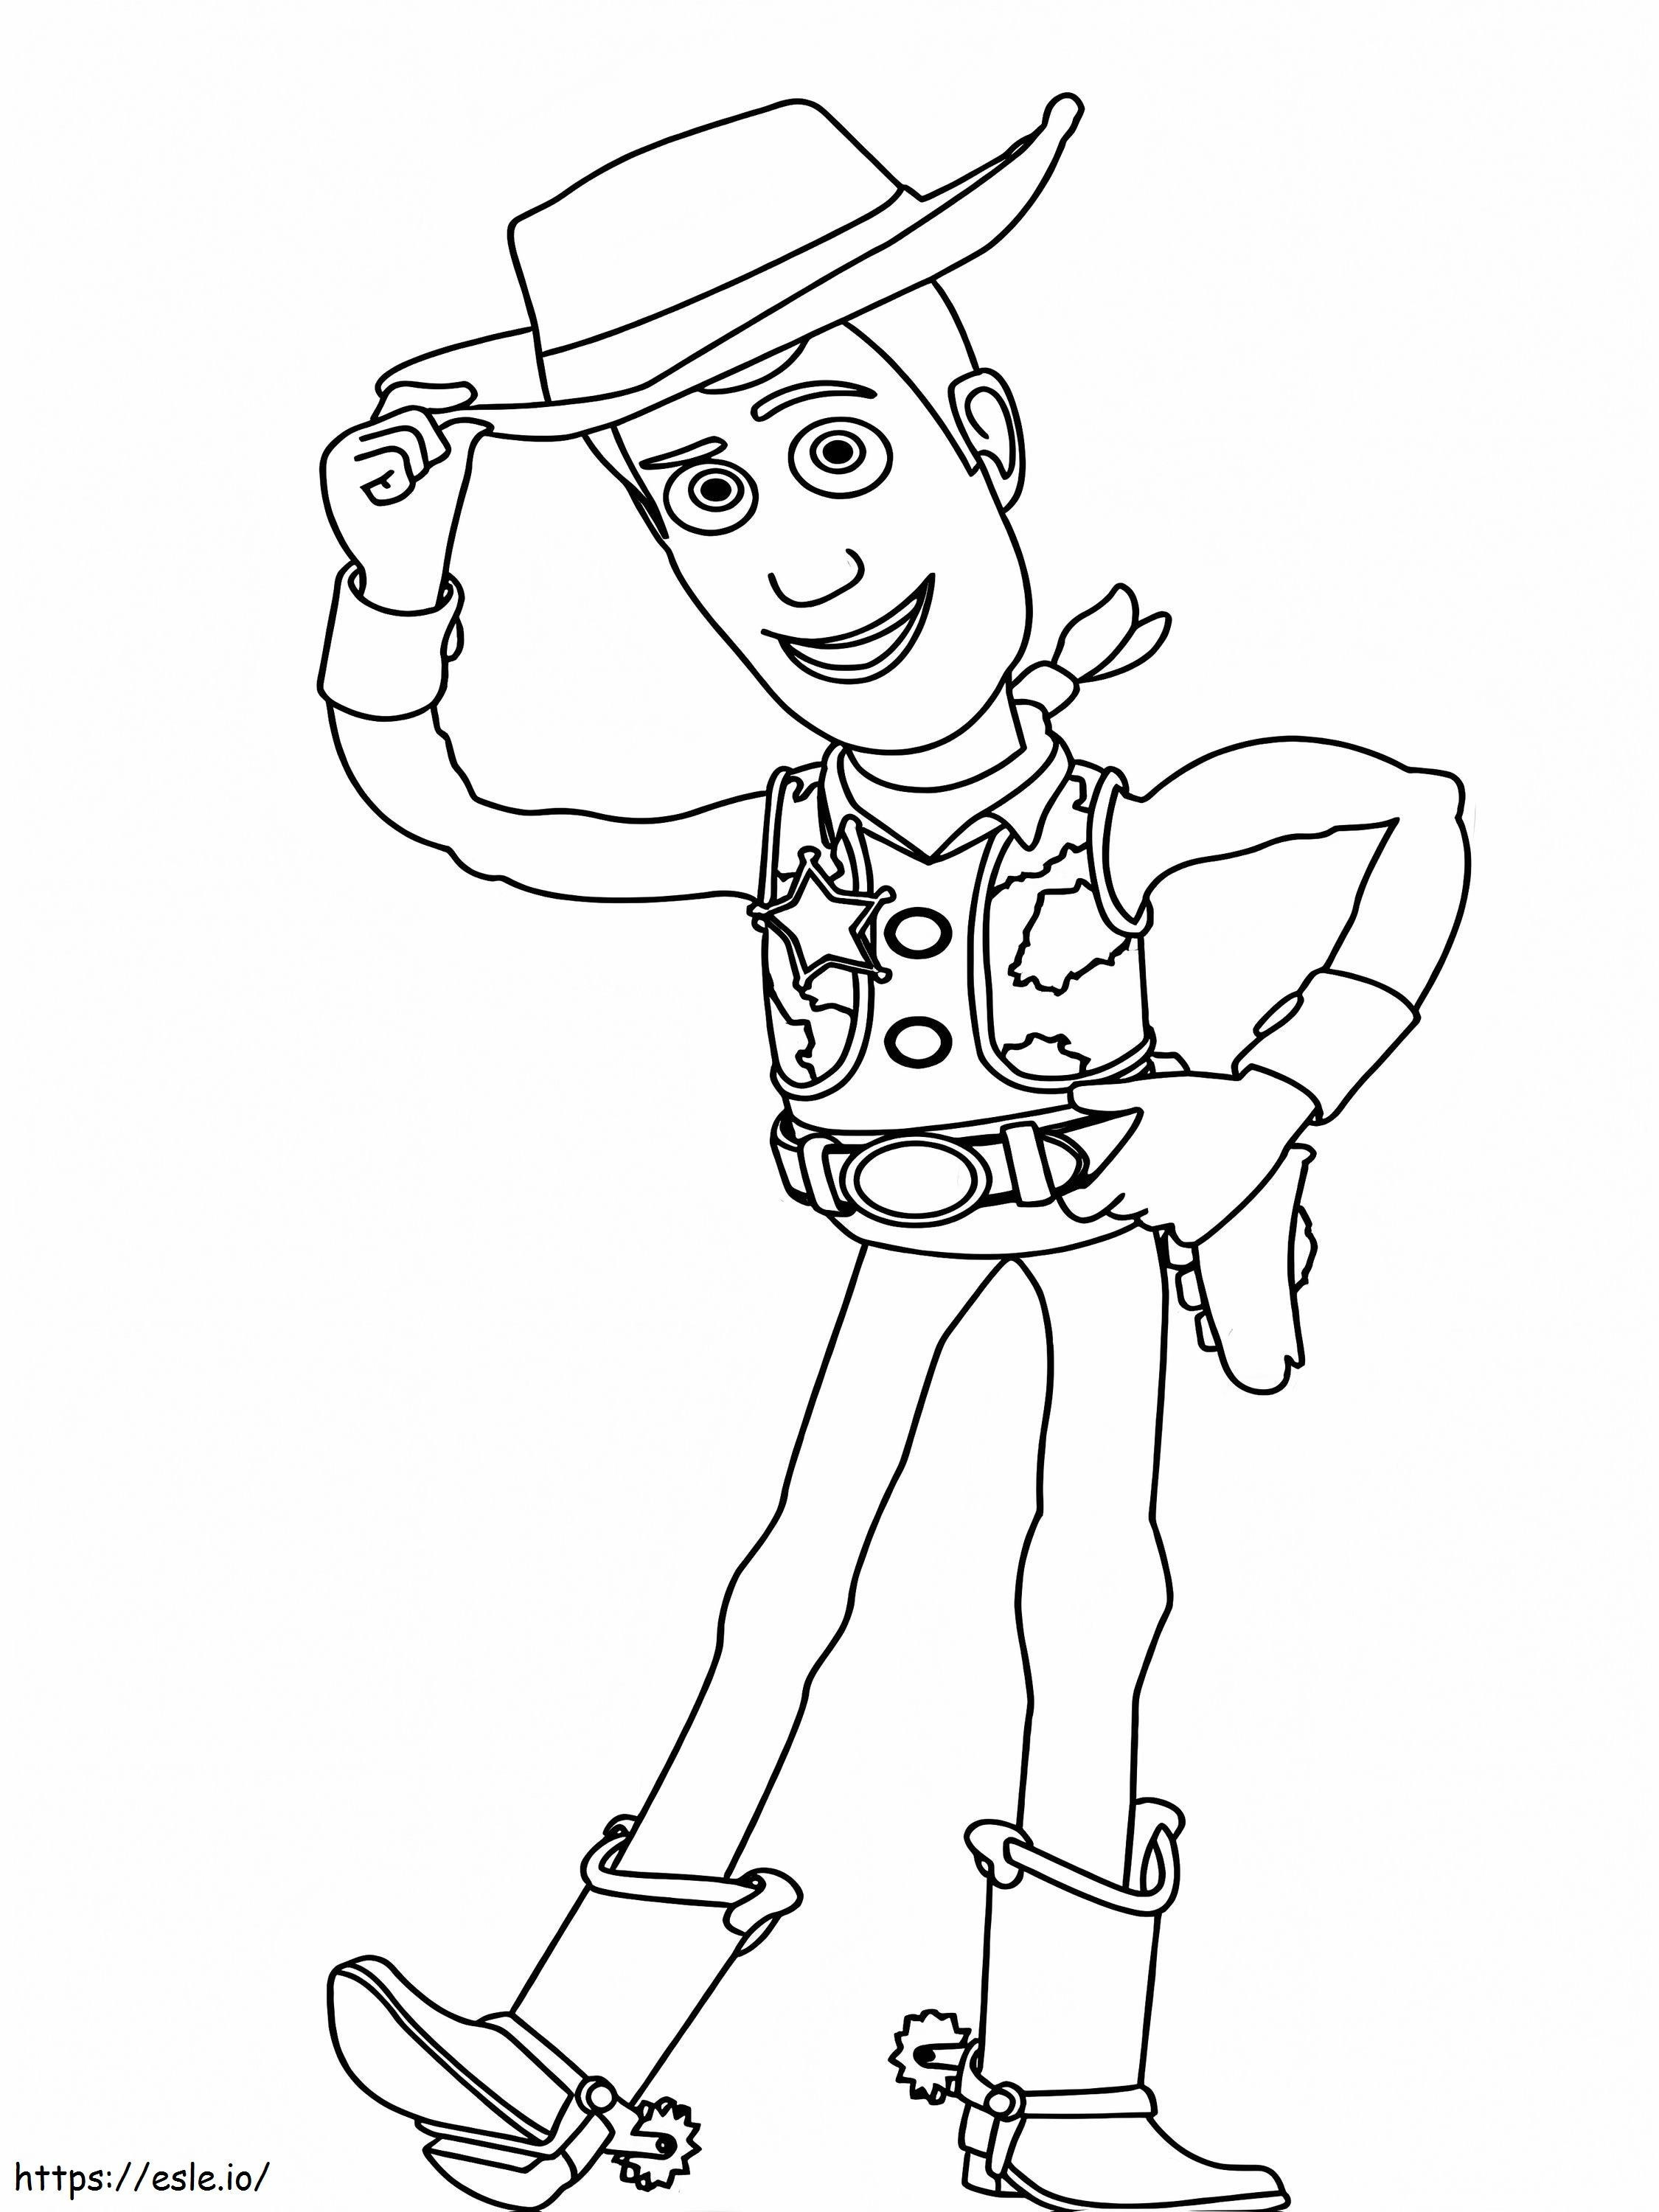 Woody Simple coloring page